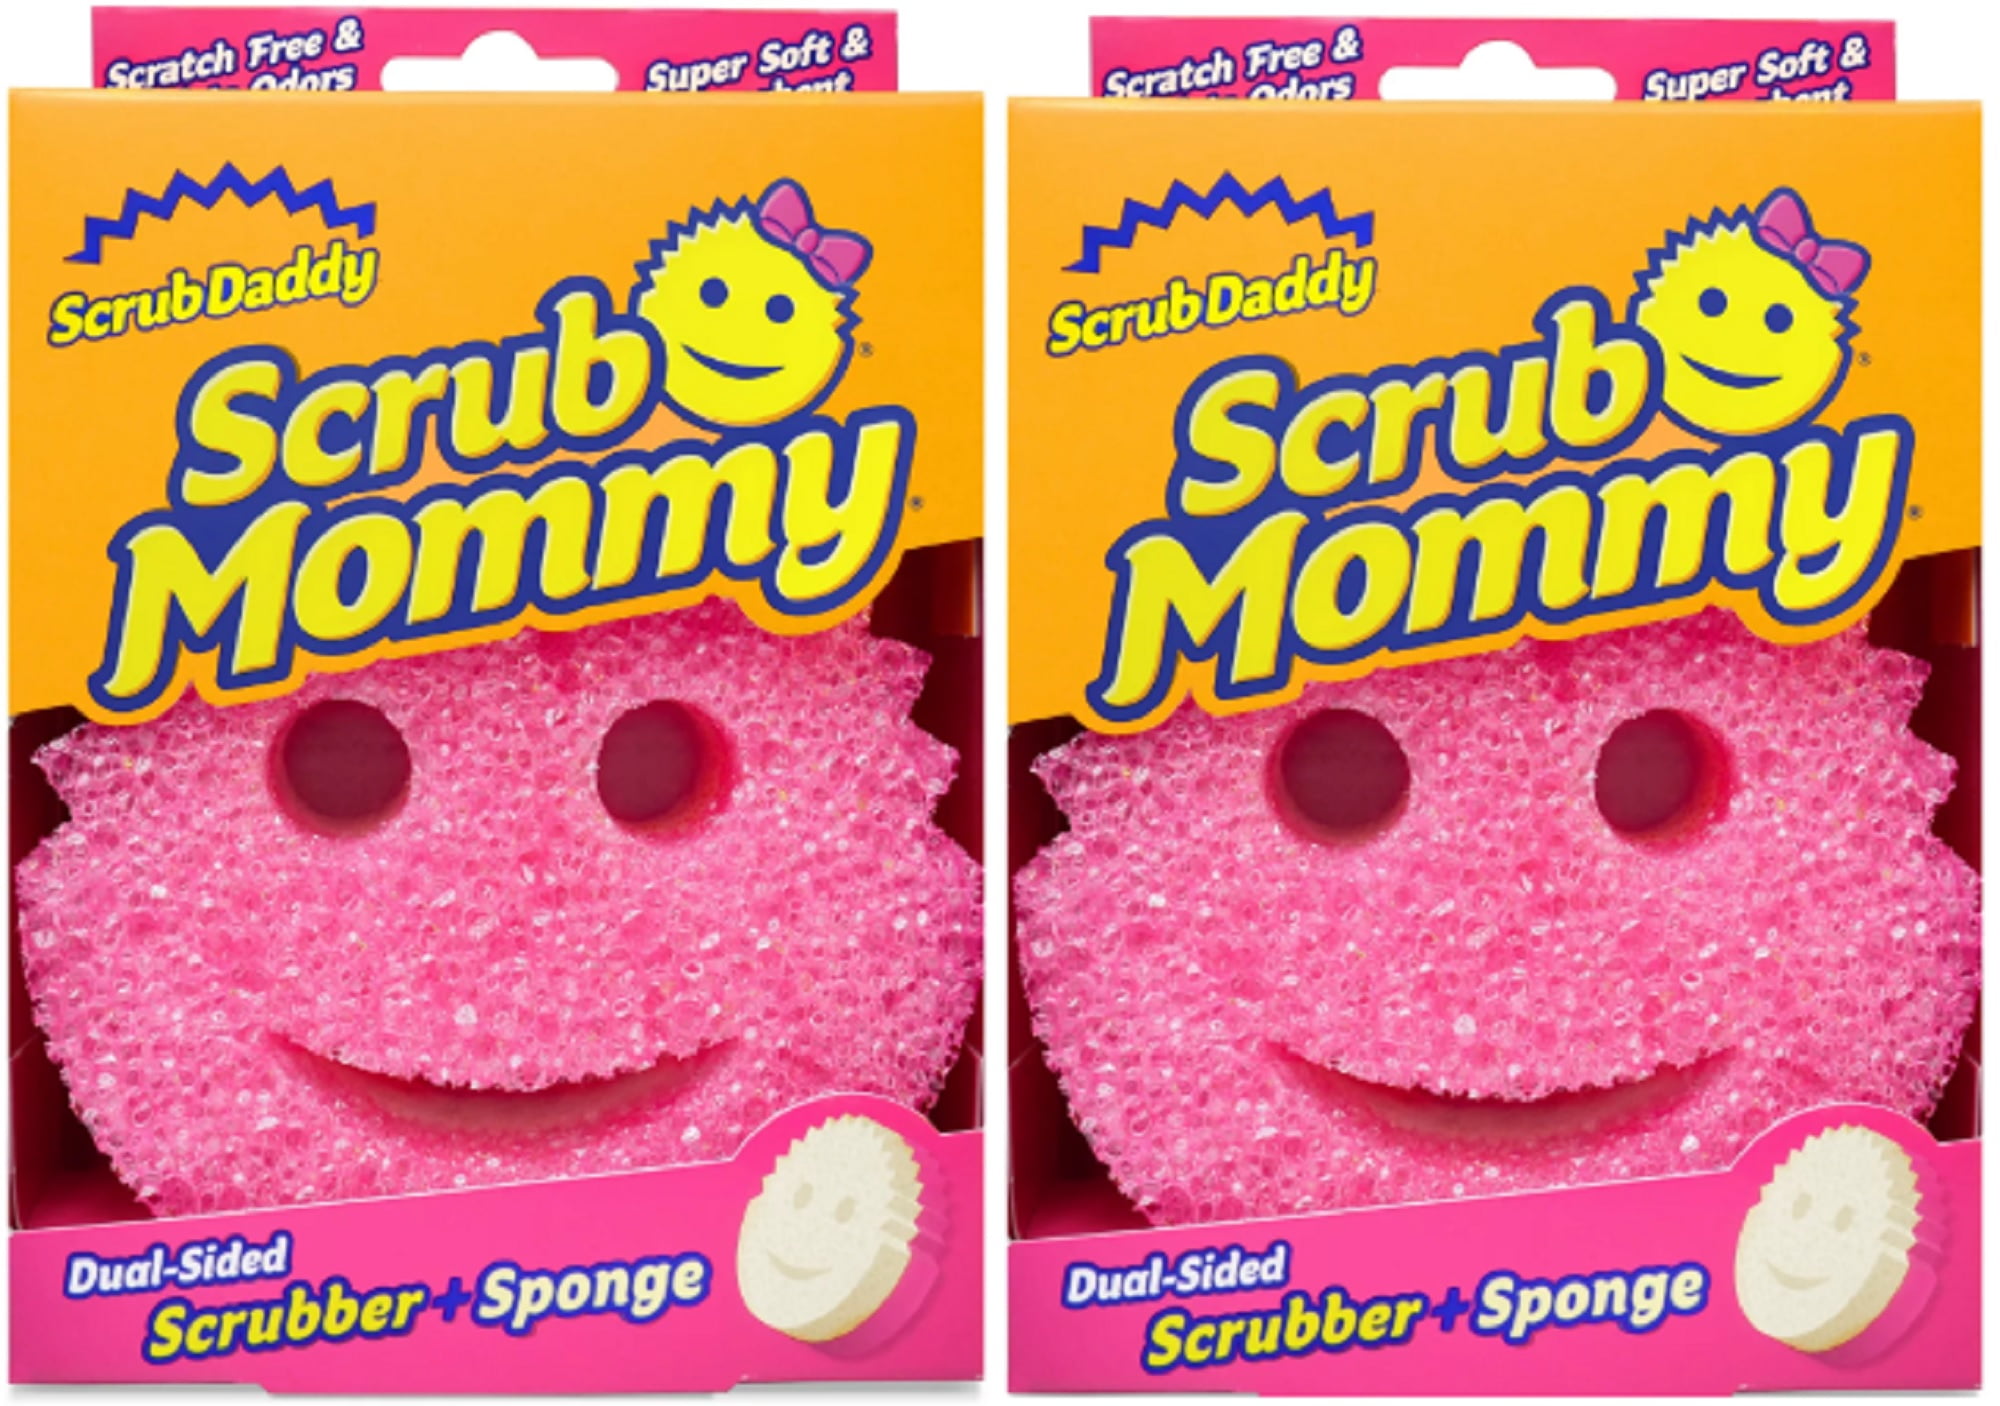 Scrub Mommy Dual-Sided Scrubber Sponge 6 Pack - Pink